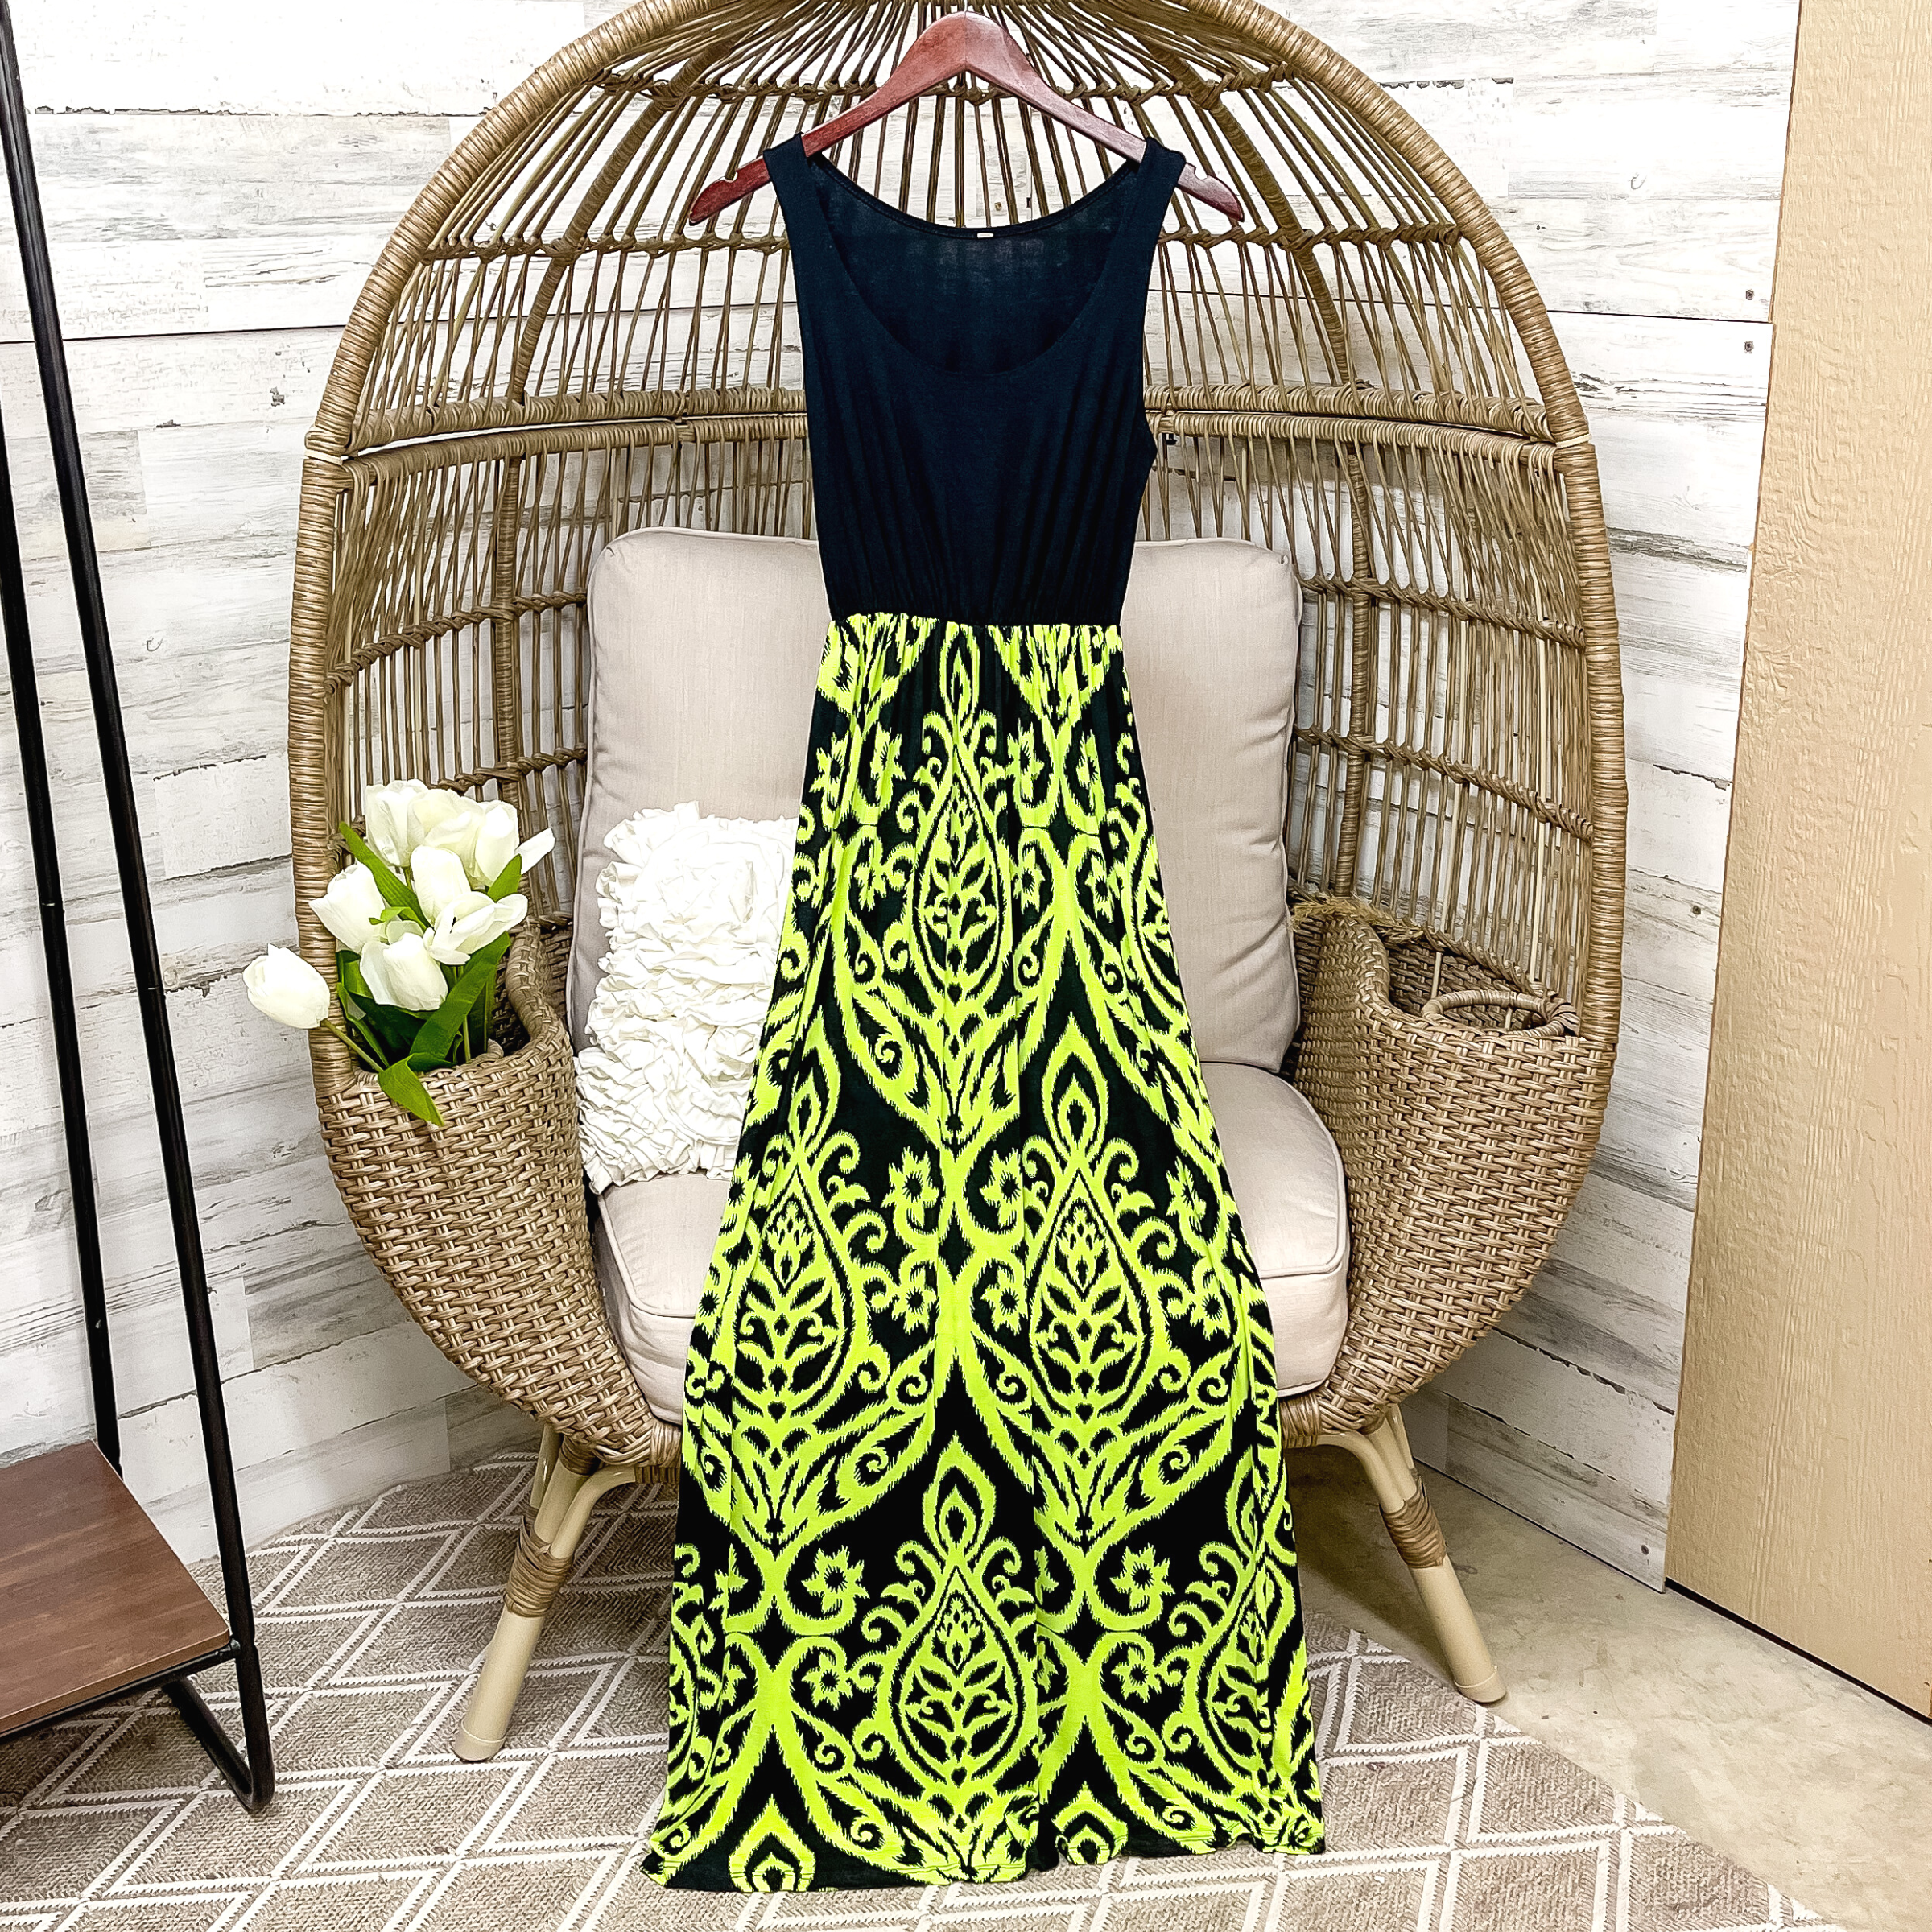 Black Tank Maxi Dress in Black and Neon Green Damask Print - Giddy Up Glamour Boutique